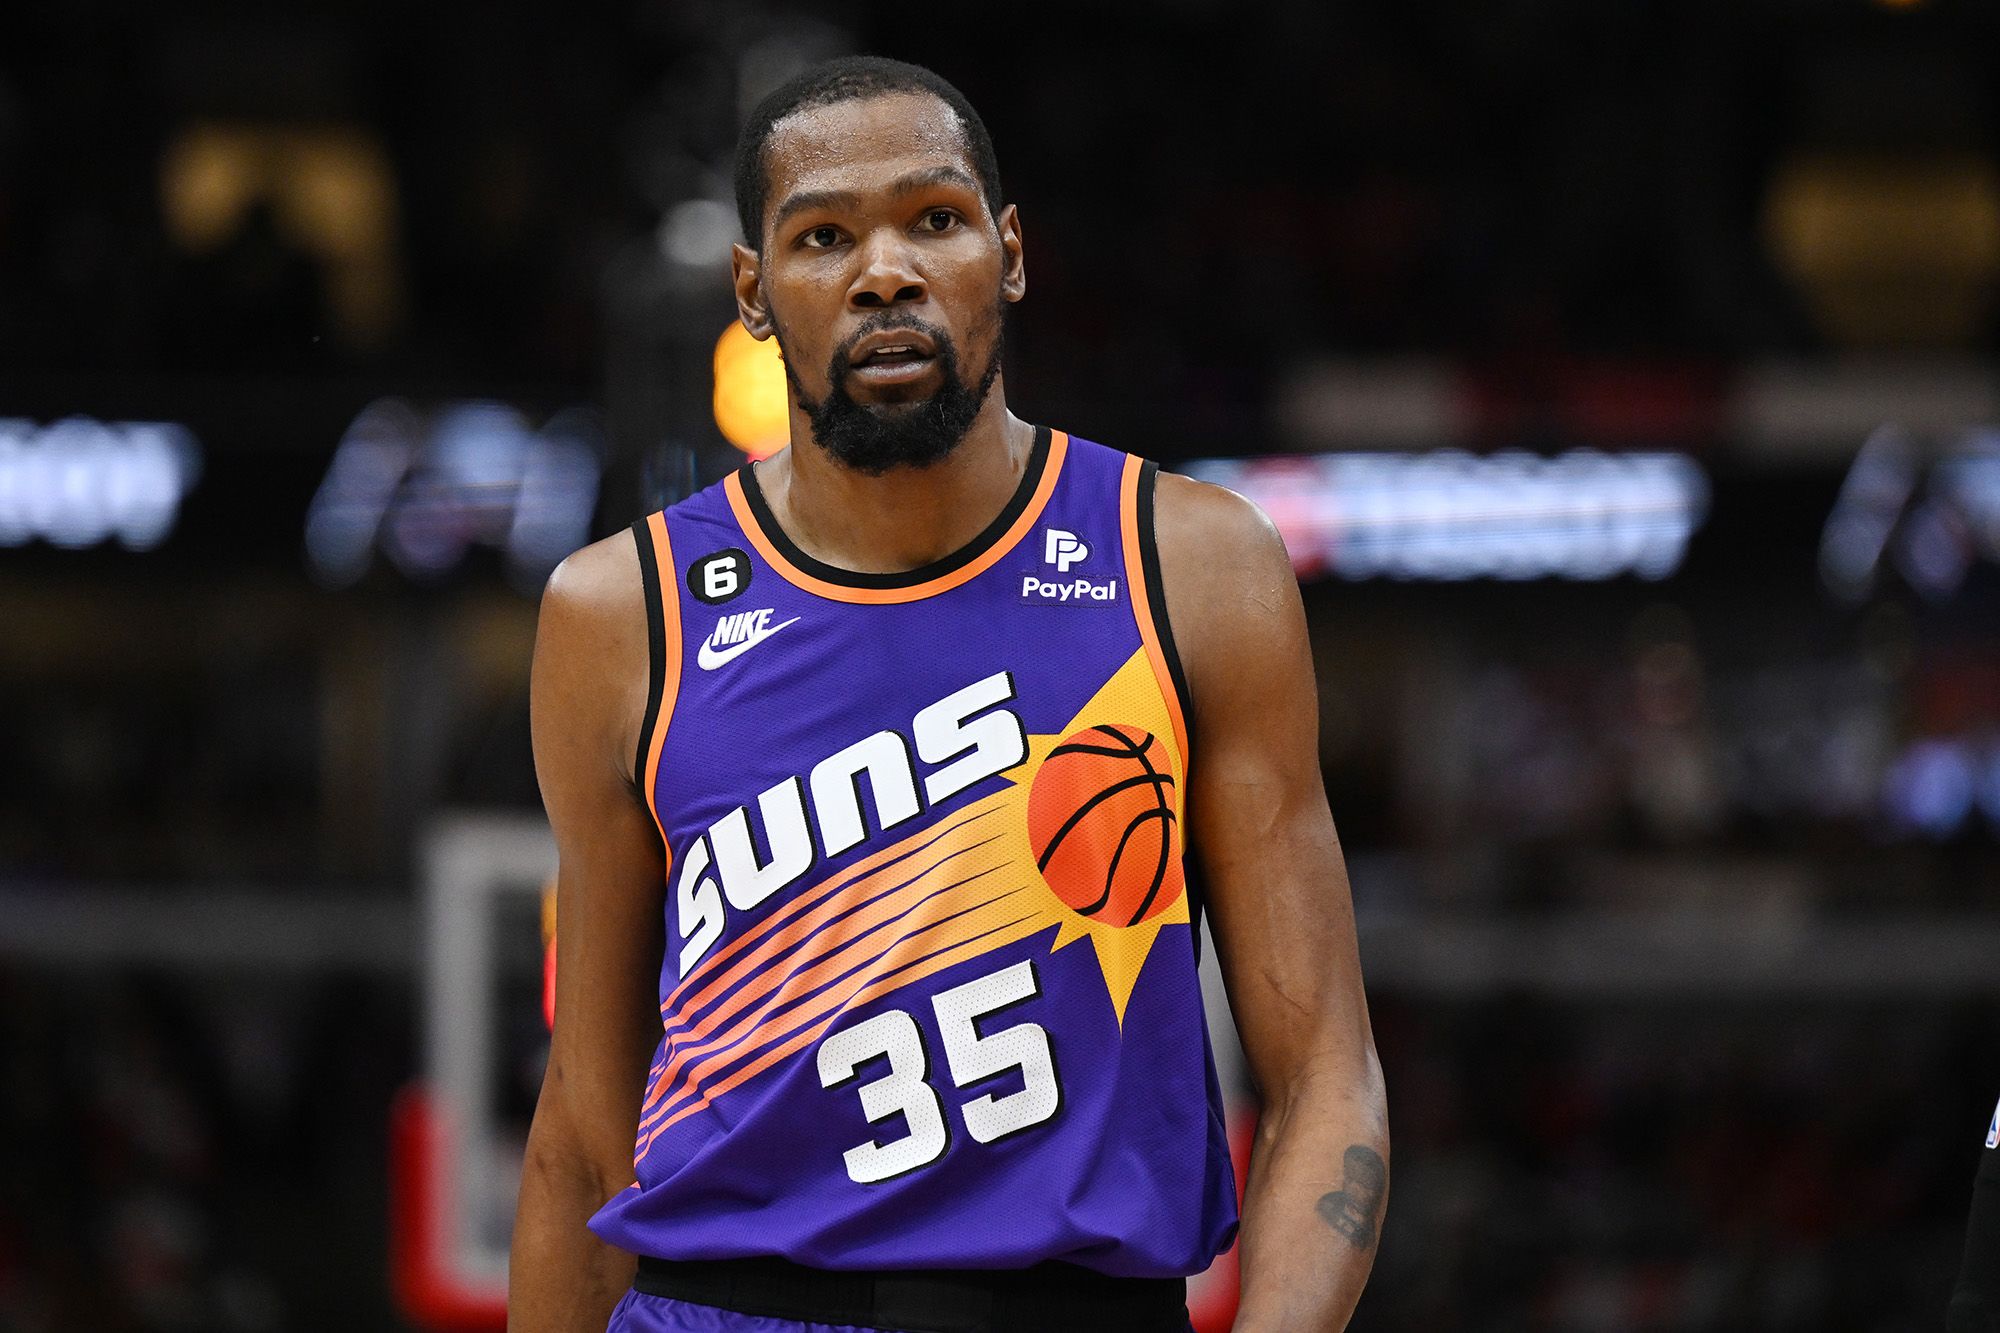 Kevin Durant Scores 30 Points to Lead the Suns to Another Victory in Denver